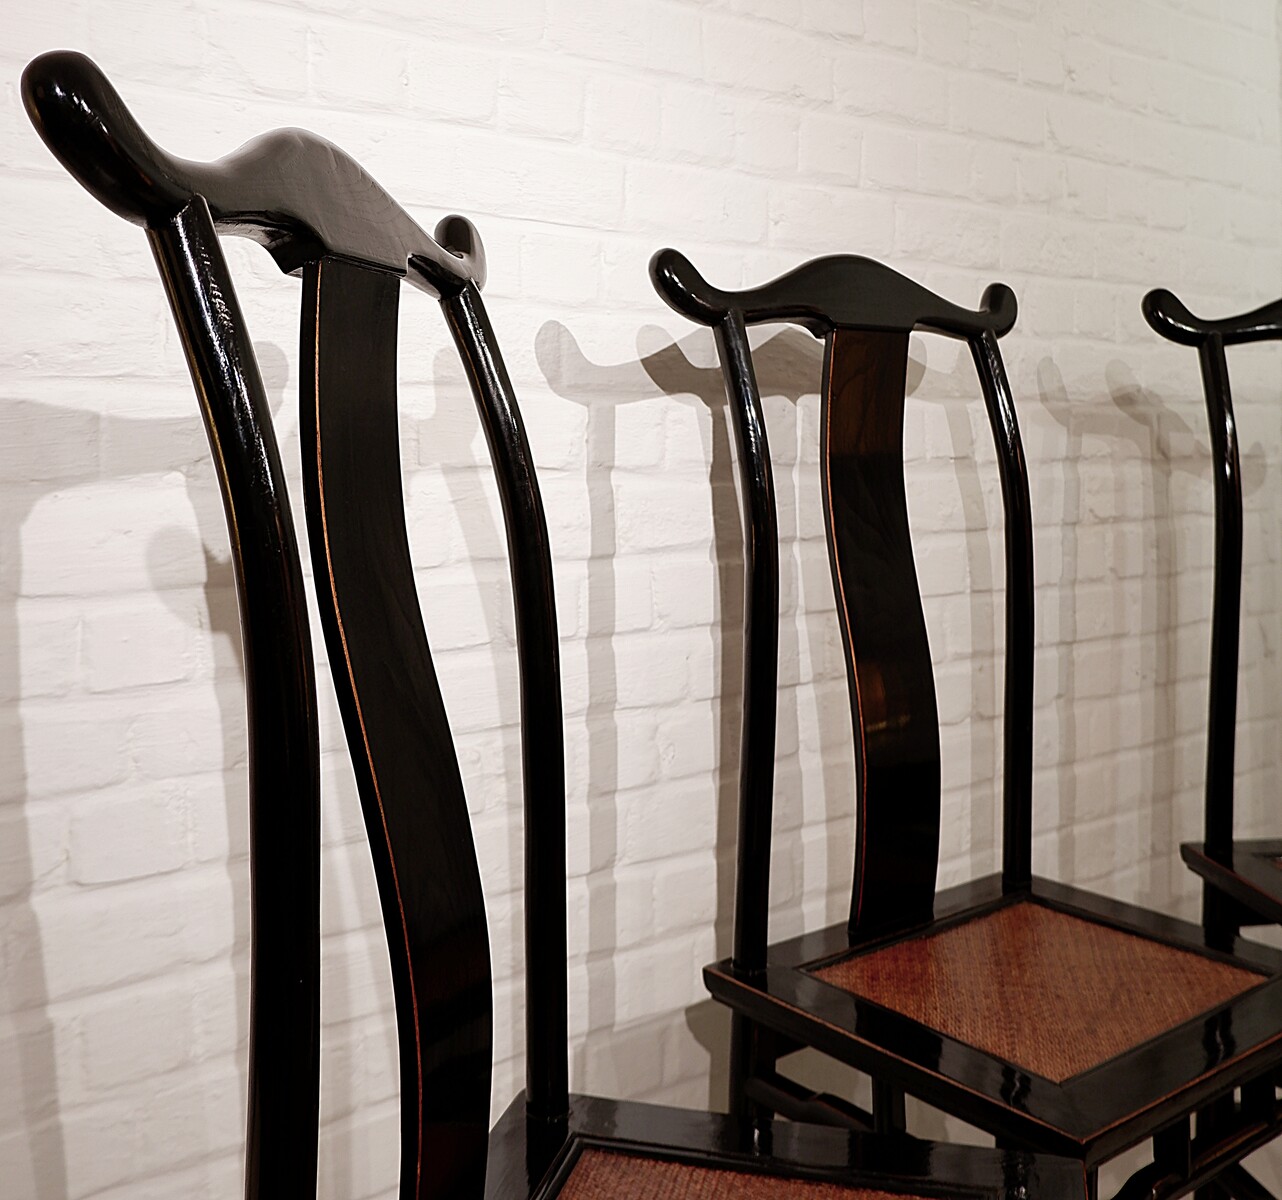 Set of 6 Chinese chairs in black lacquered wood